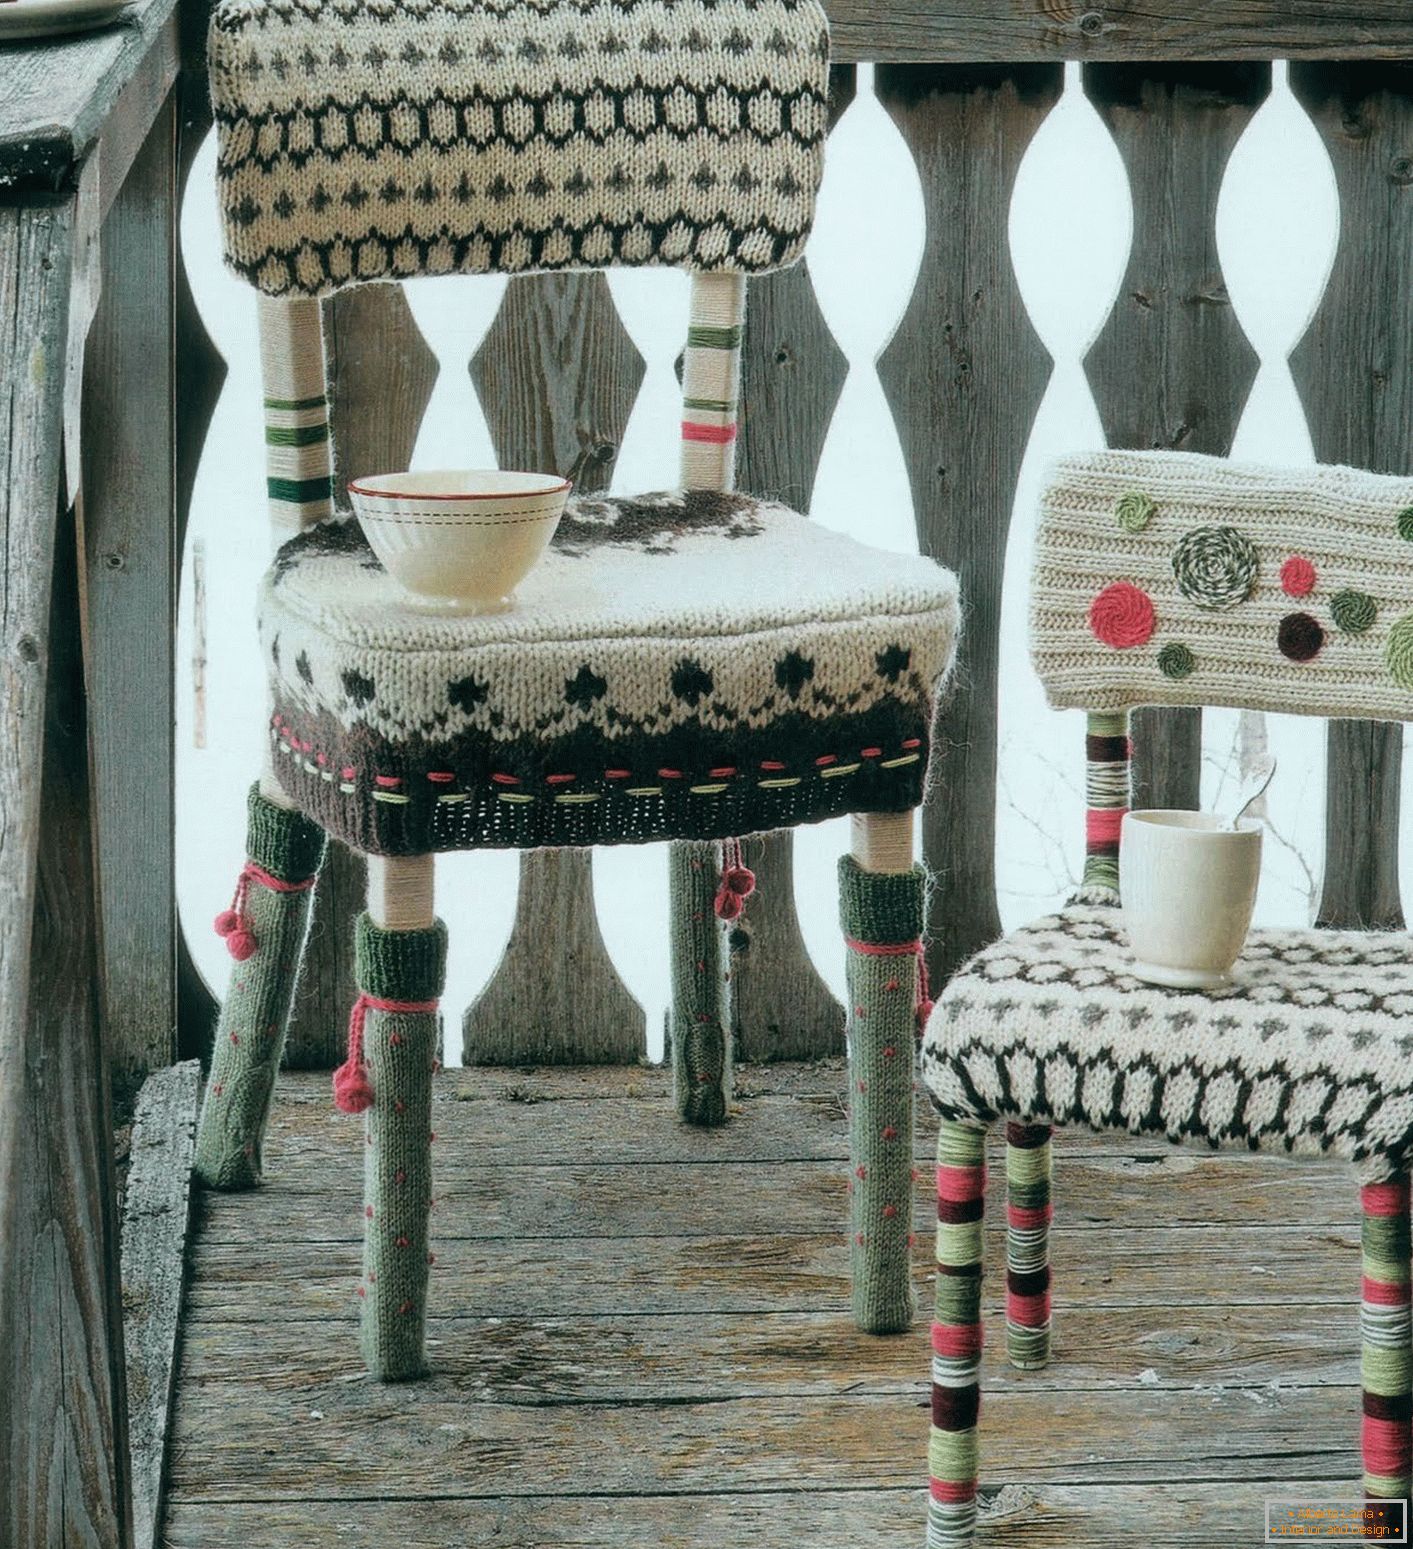 Chair with knitted cover on the seat, backrest and legs